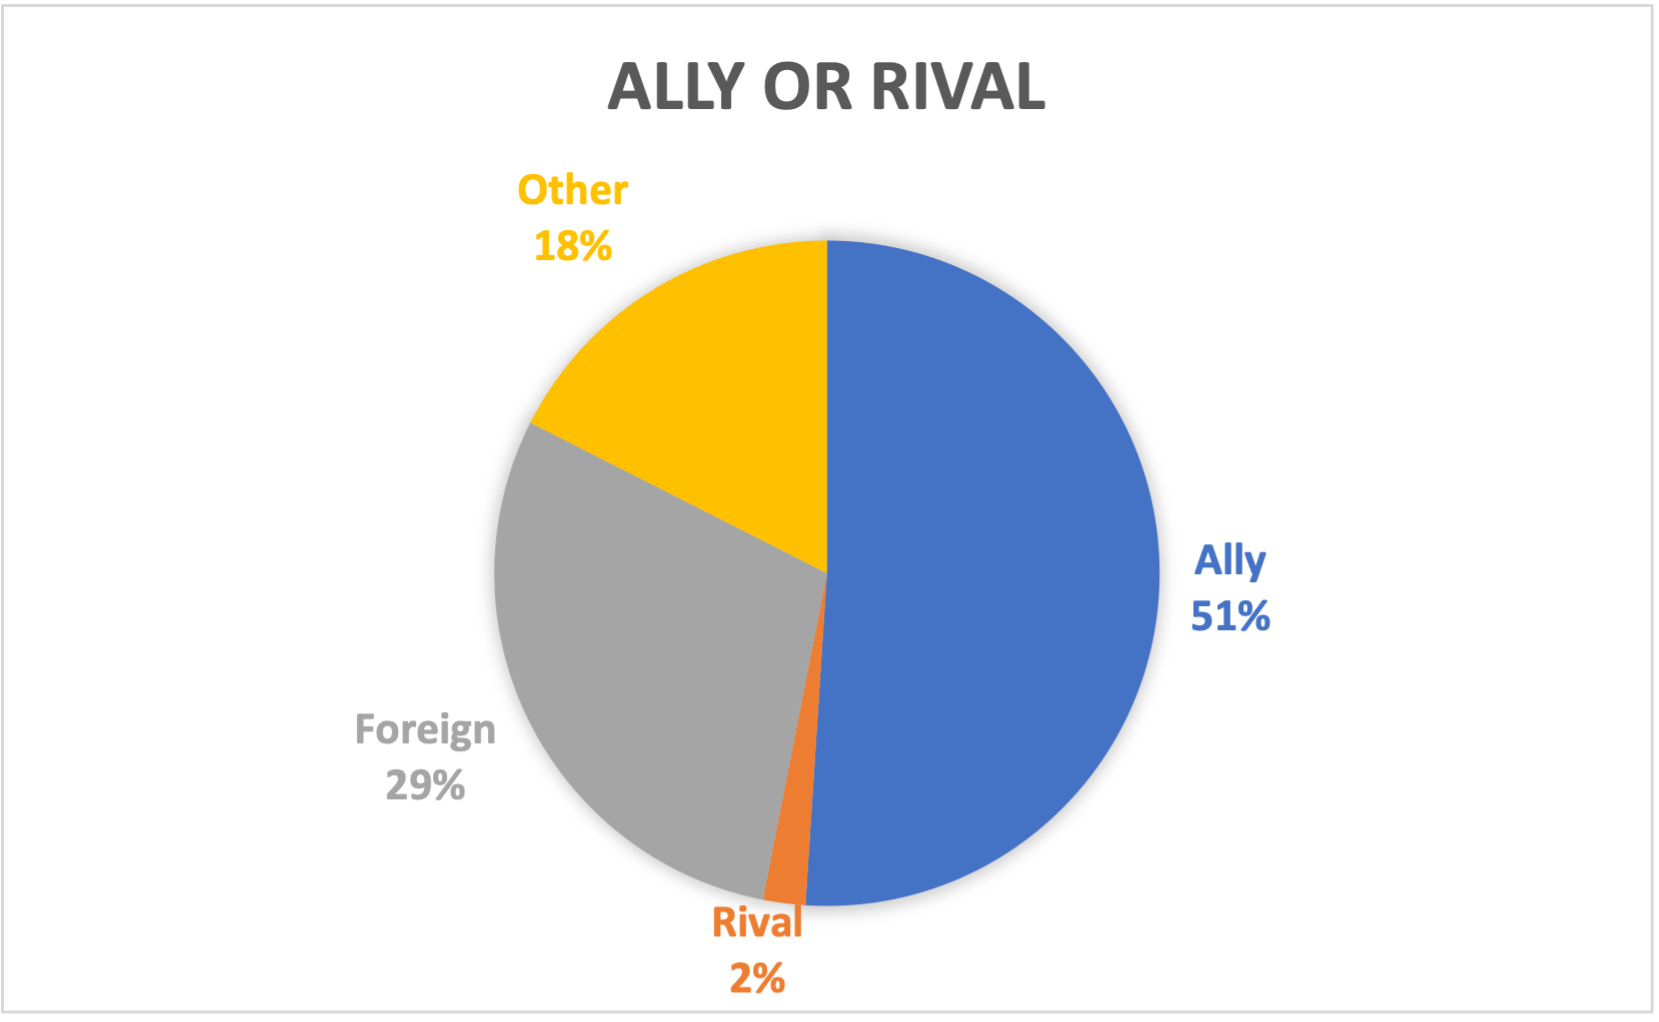 Ally or rival